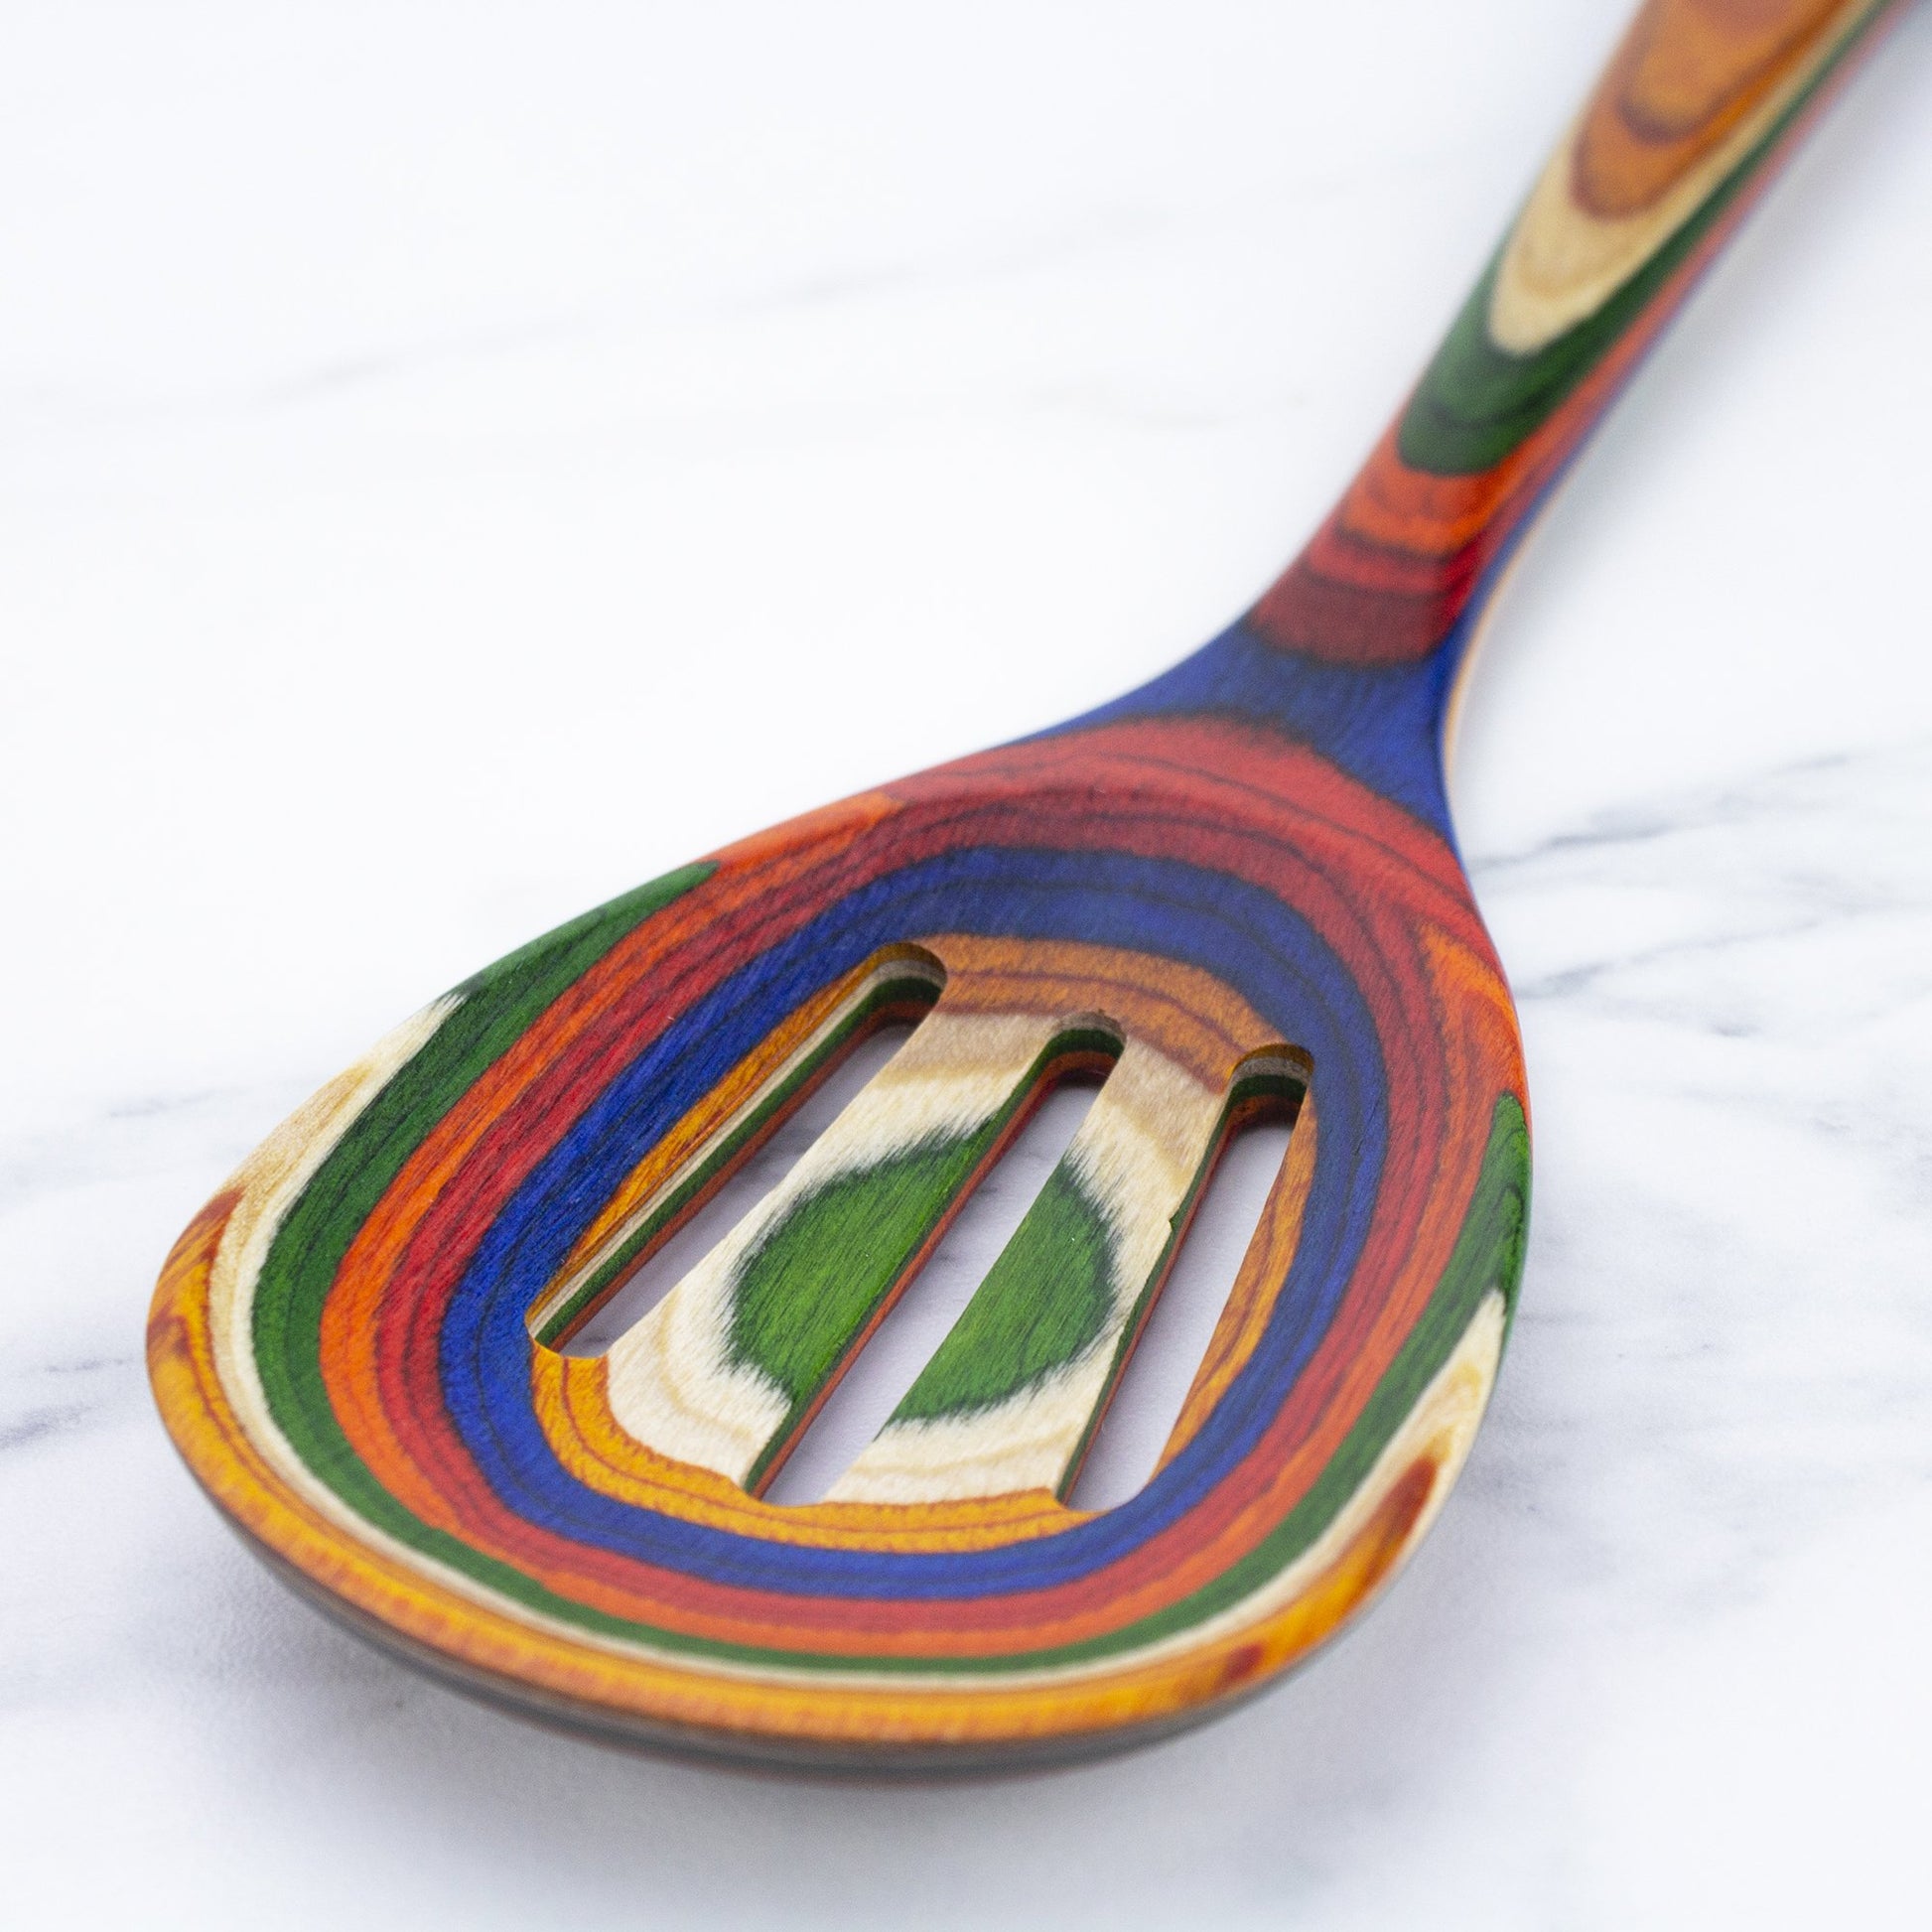 close-up view of spoon on white background.